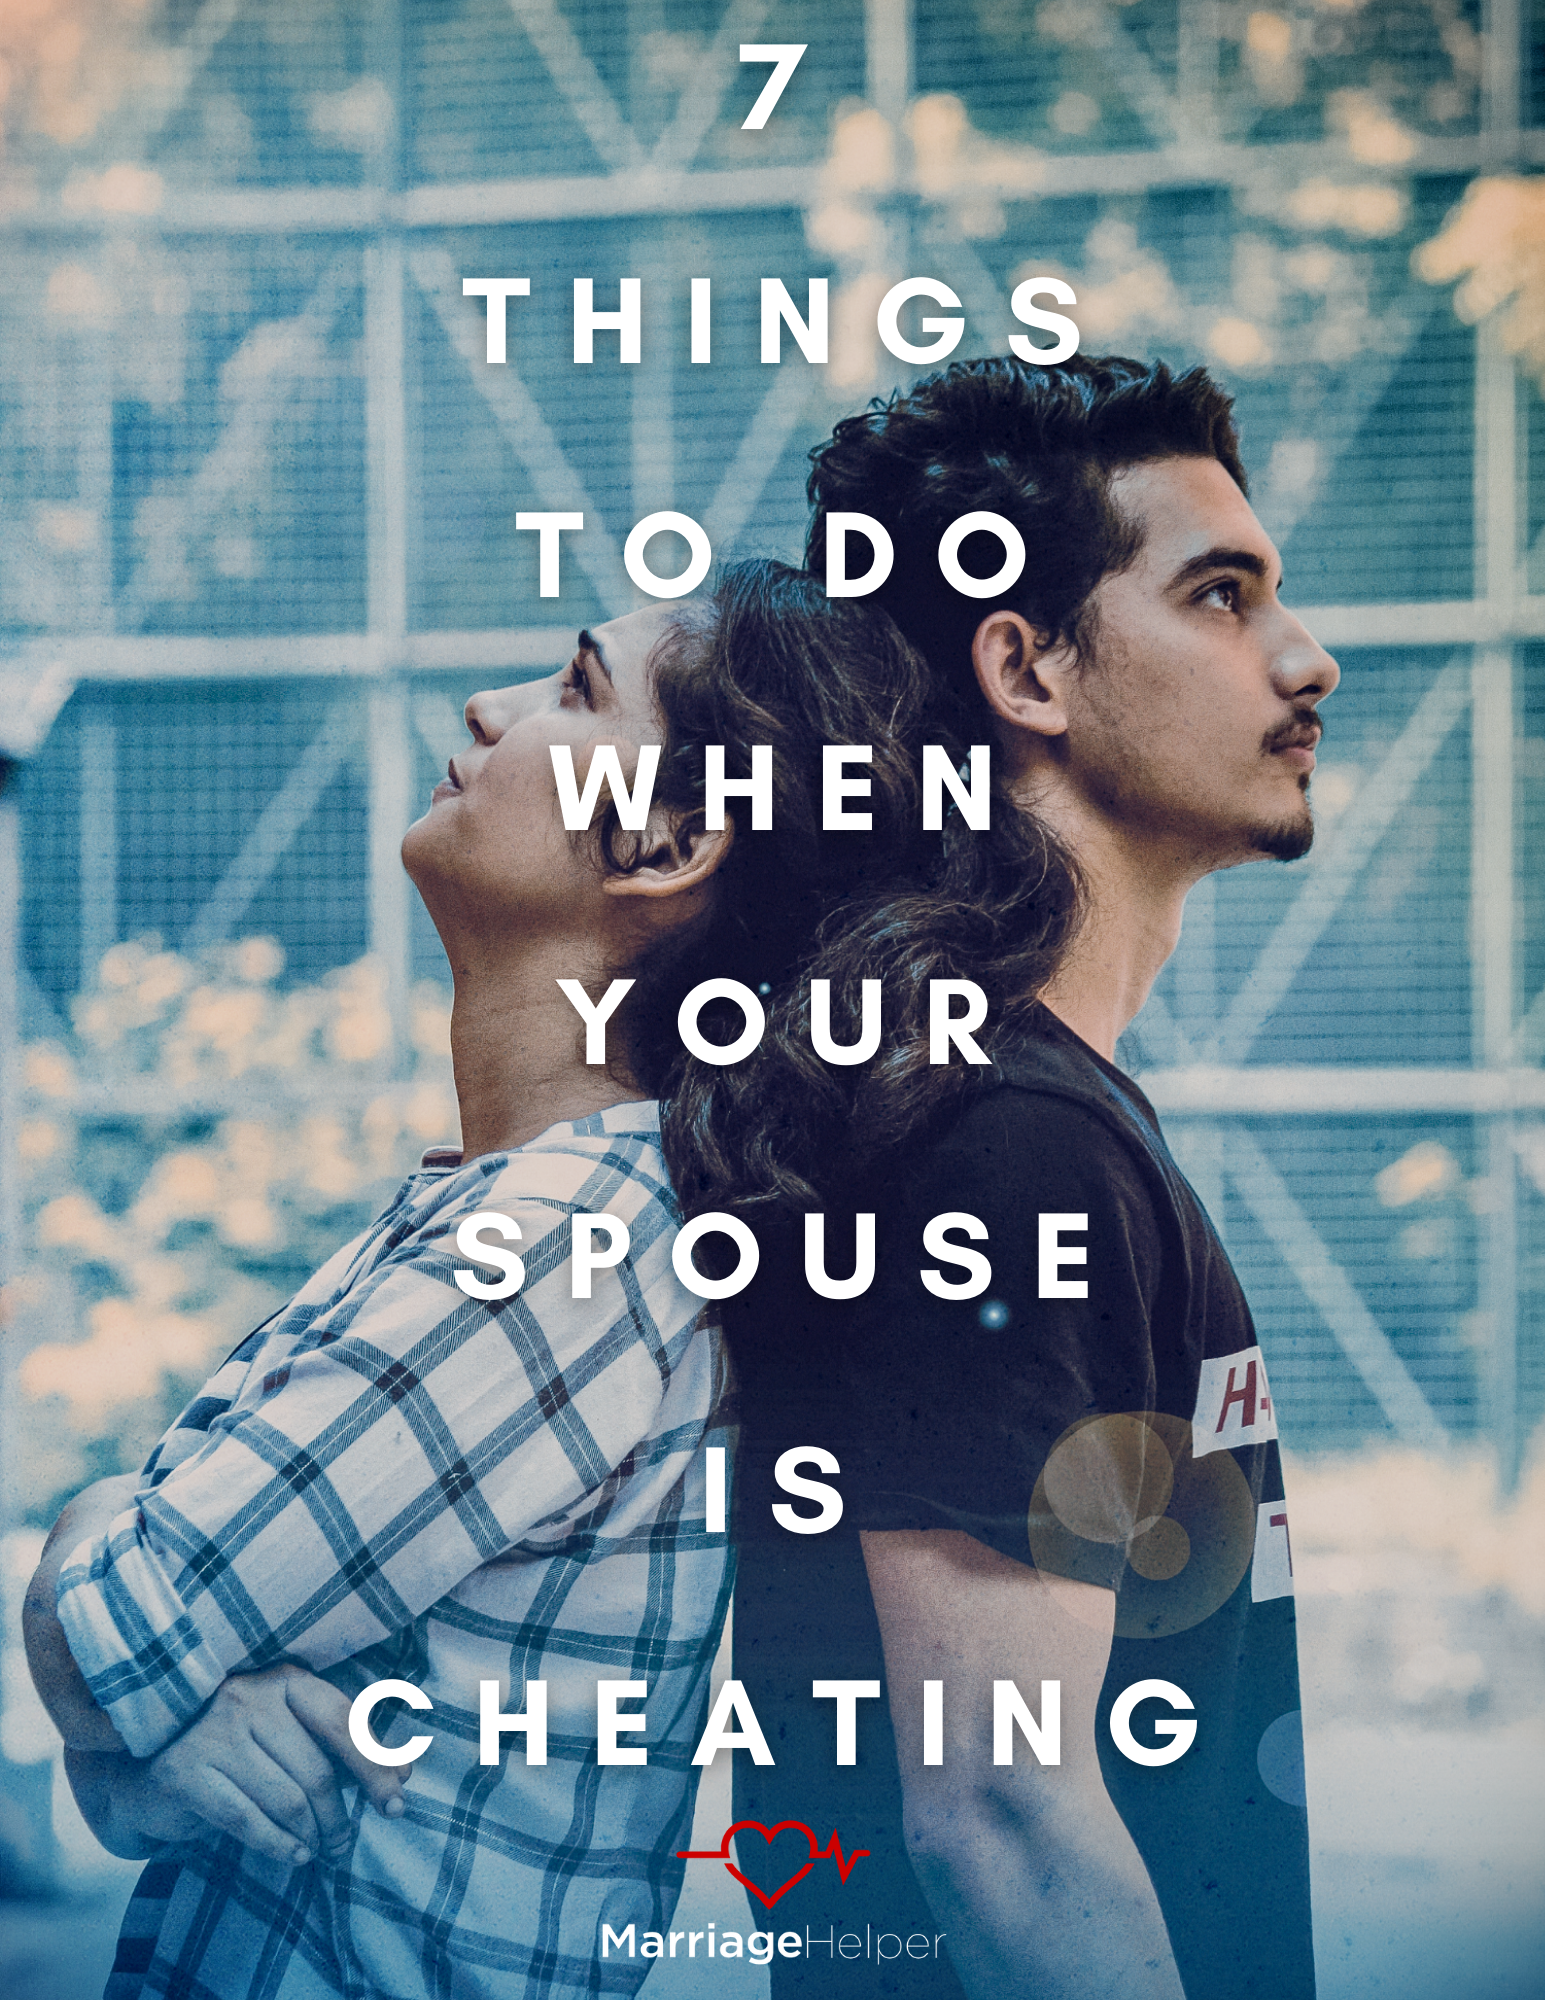 7 things to do when your spouse is cheating eBook revised